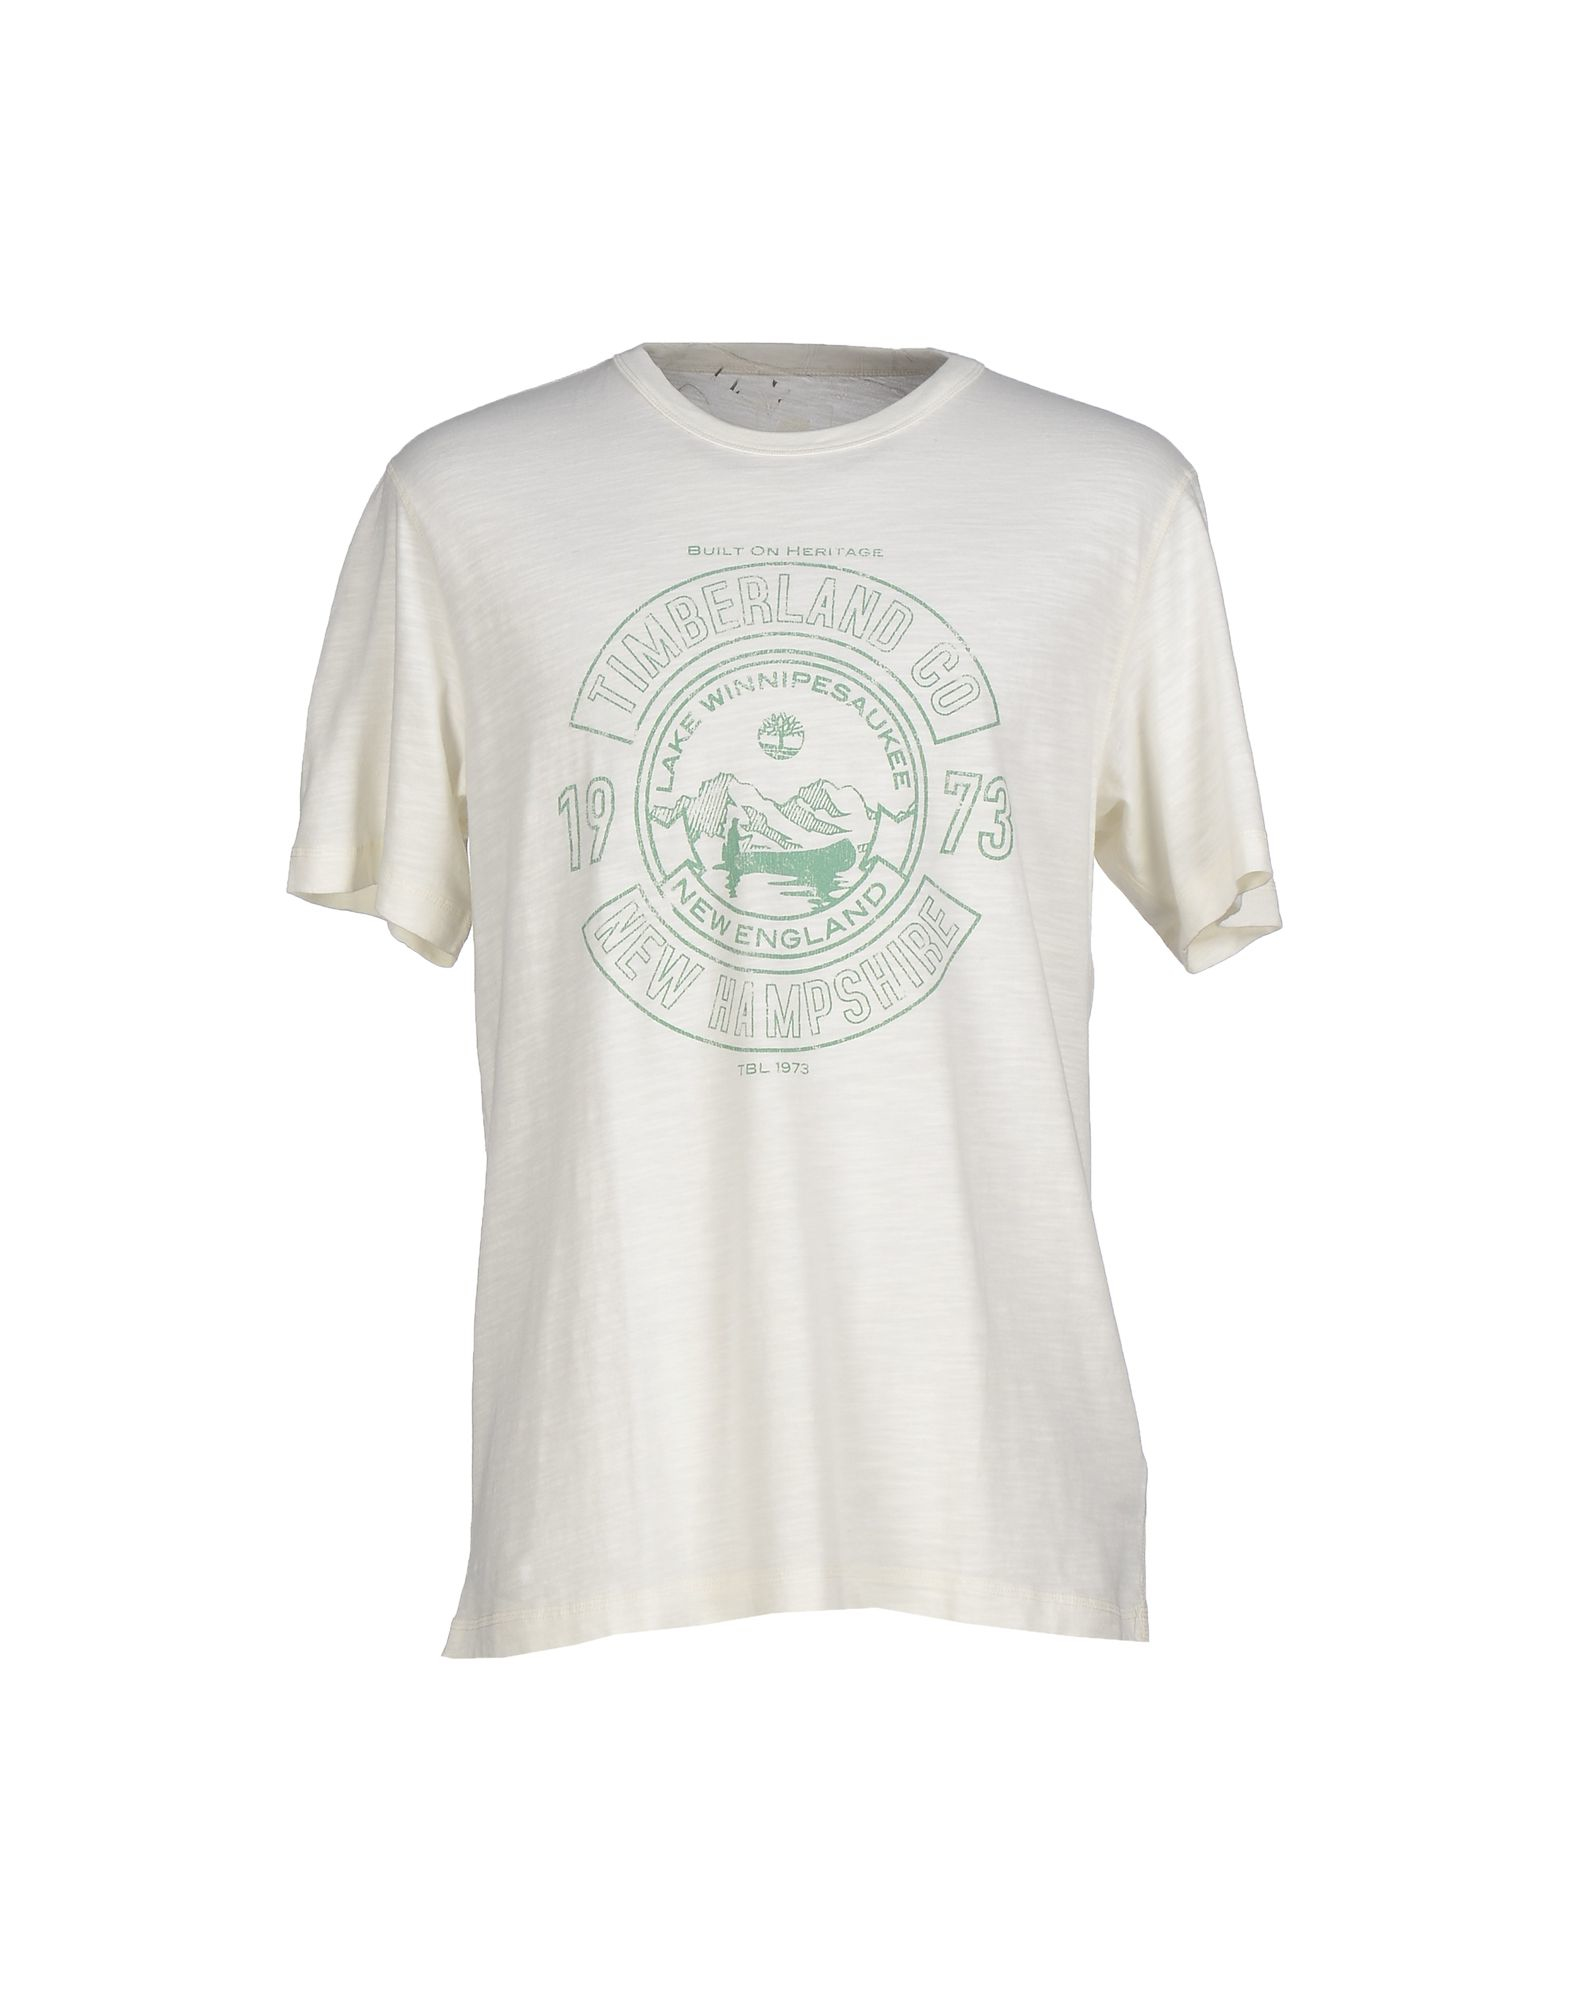 Timberland T-Shirt in White for Men - Lyst